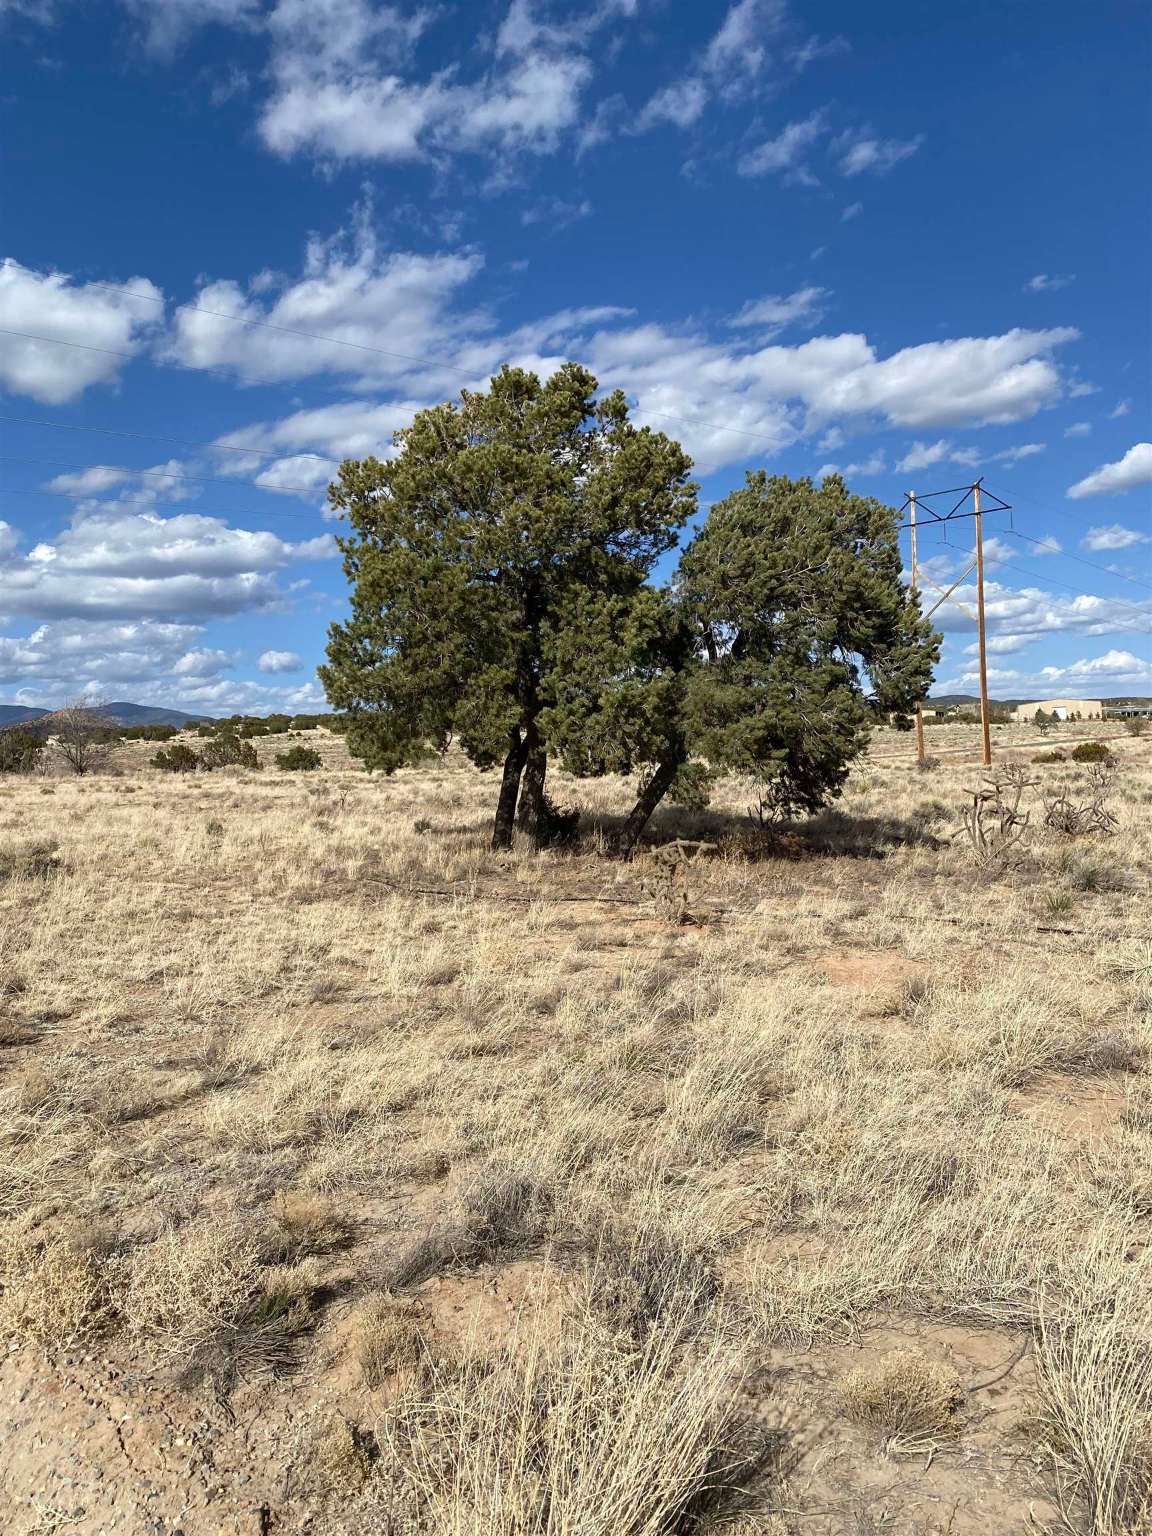 50 OLD, Lamy, New Mexico 87540, ,Land,For Sale,50 OLD,202201135